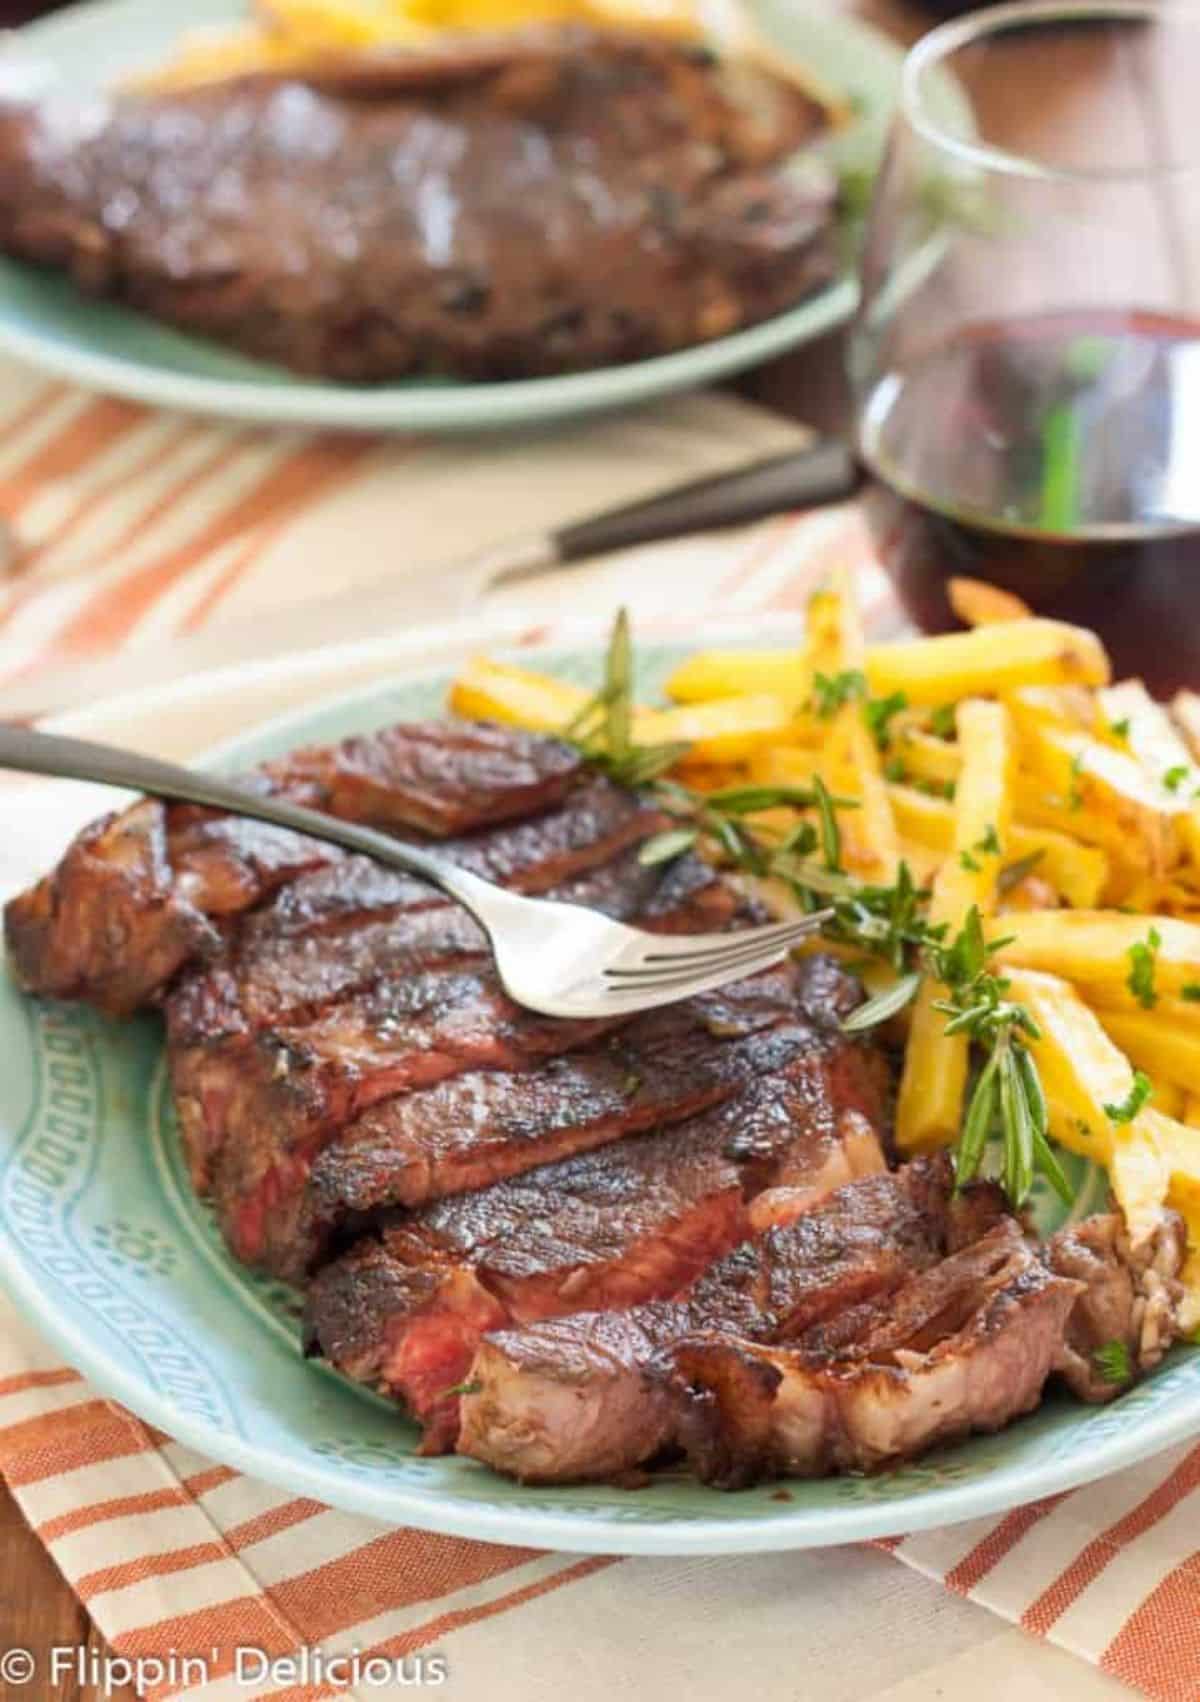 Red Wine-Marinated Steak with fries on a blue plate with a fork.